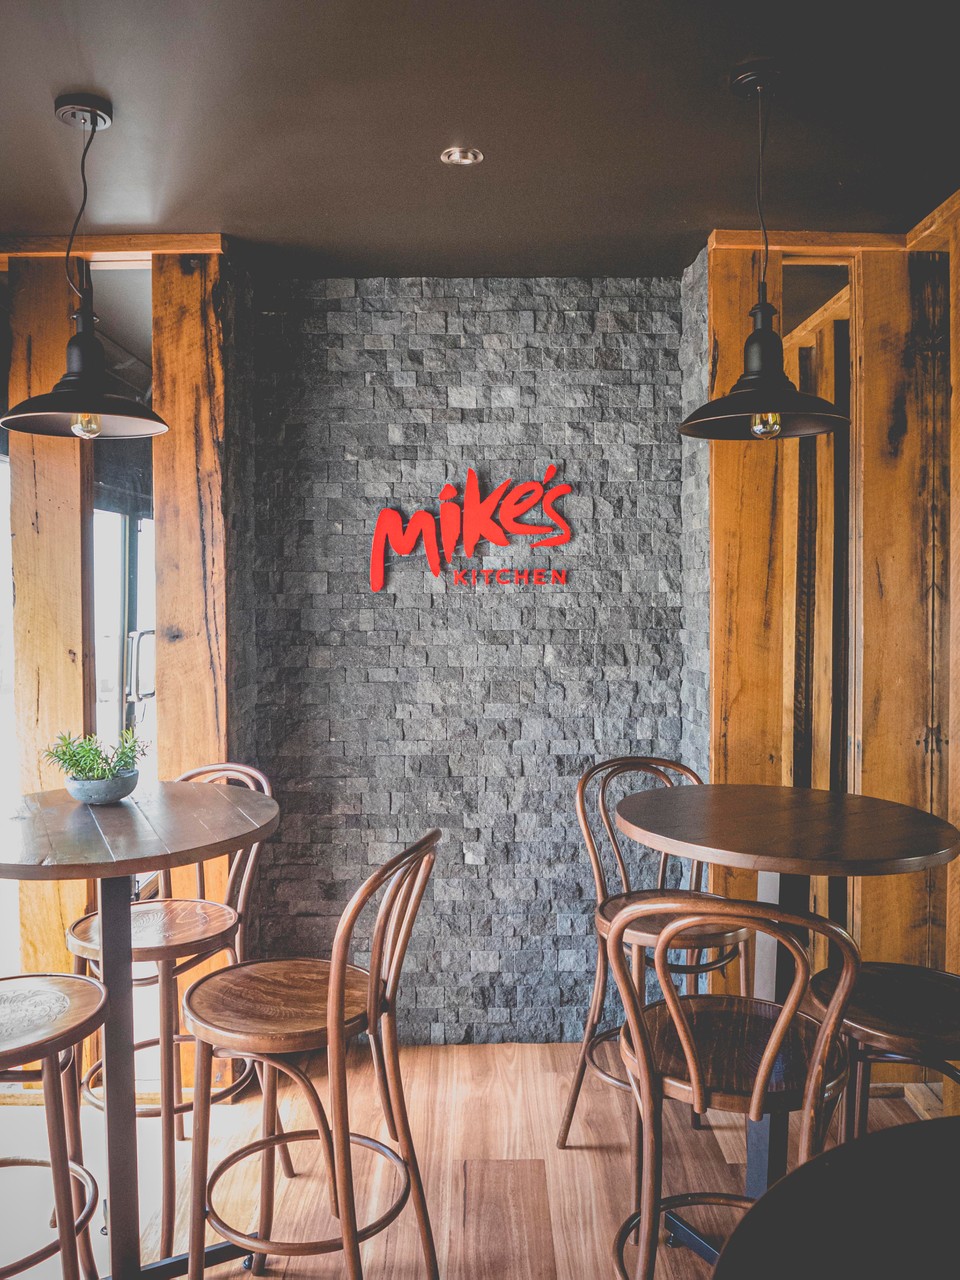 Welcome to Mike’s